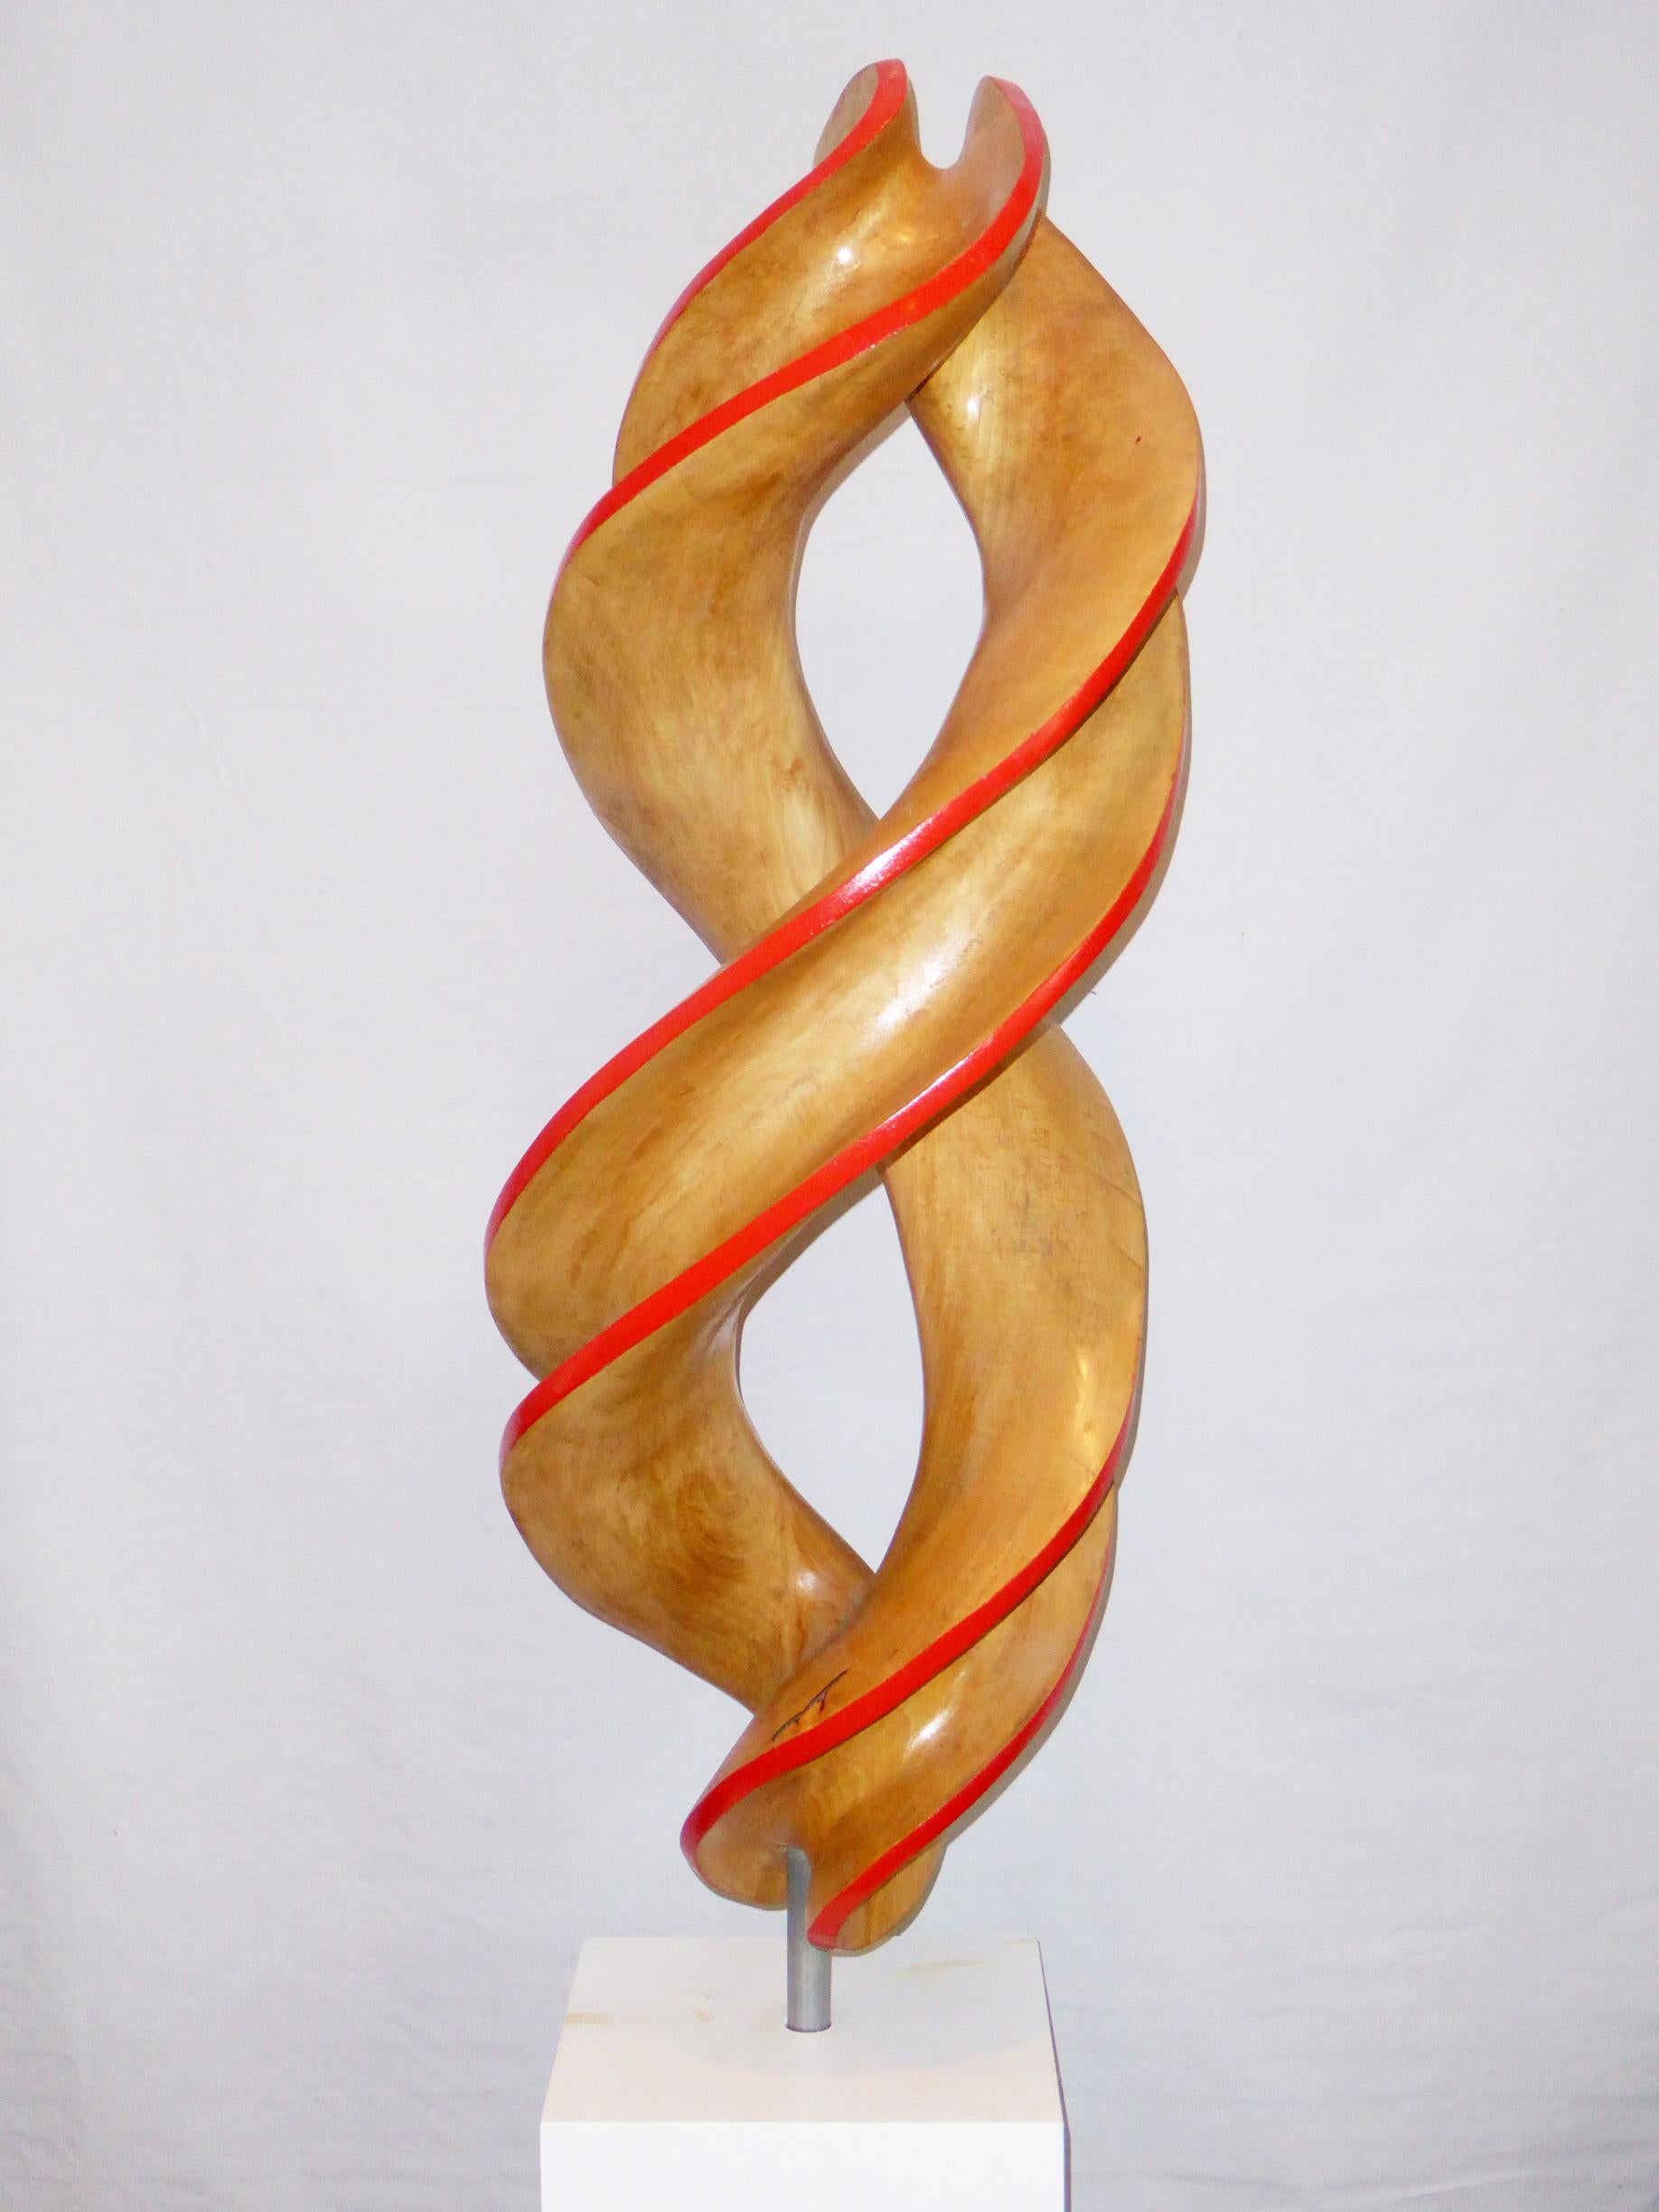 Eric Pesso Abstract Sculpture - Spiral#2-Red, large maple sculpture, carved, painted elements